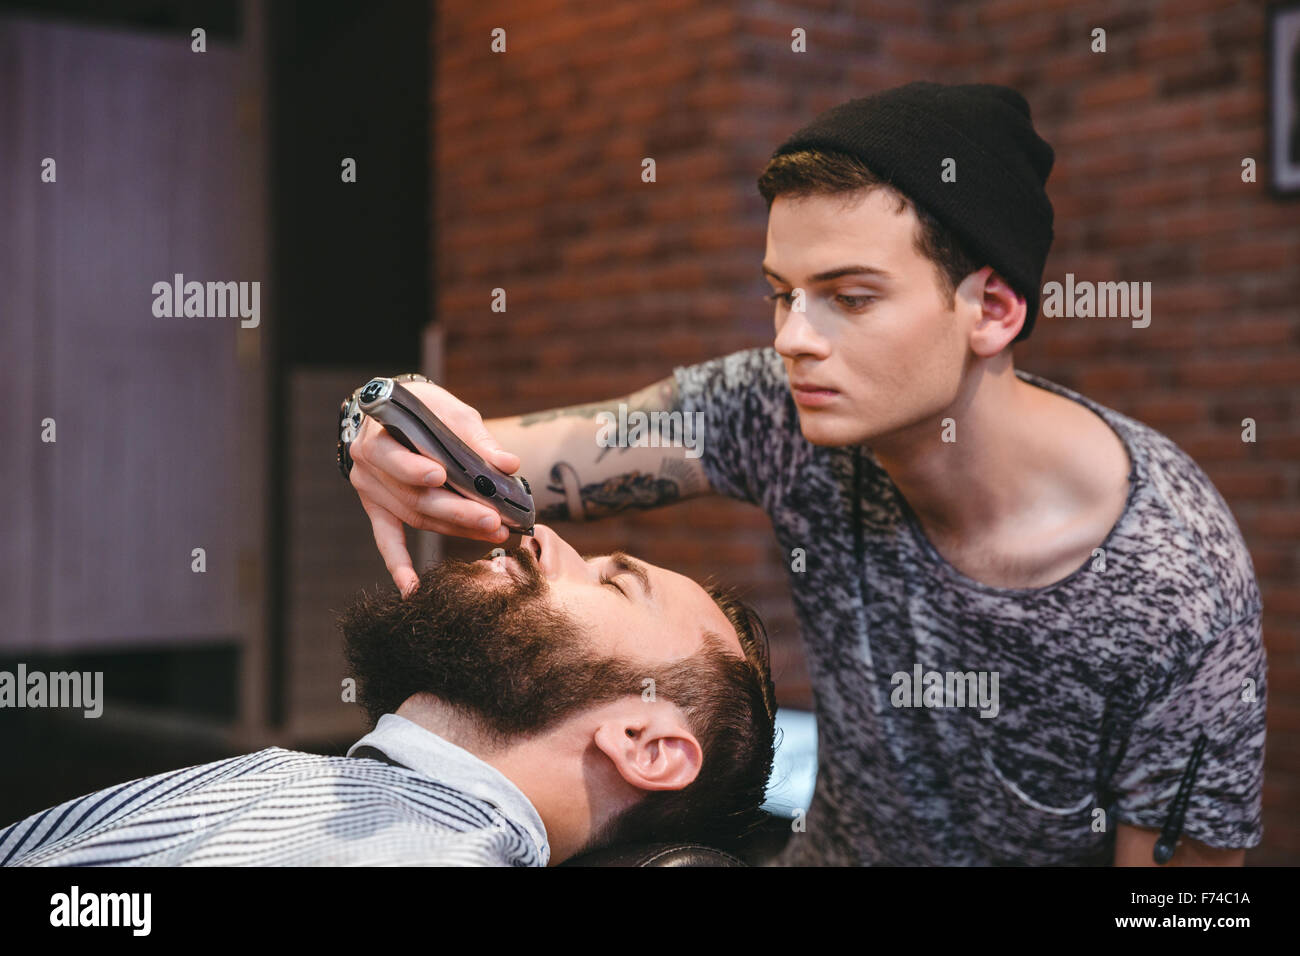 Concentrated skillful young barber trimming beard of handsome young man in barbershop Stock Photo